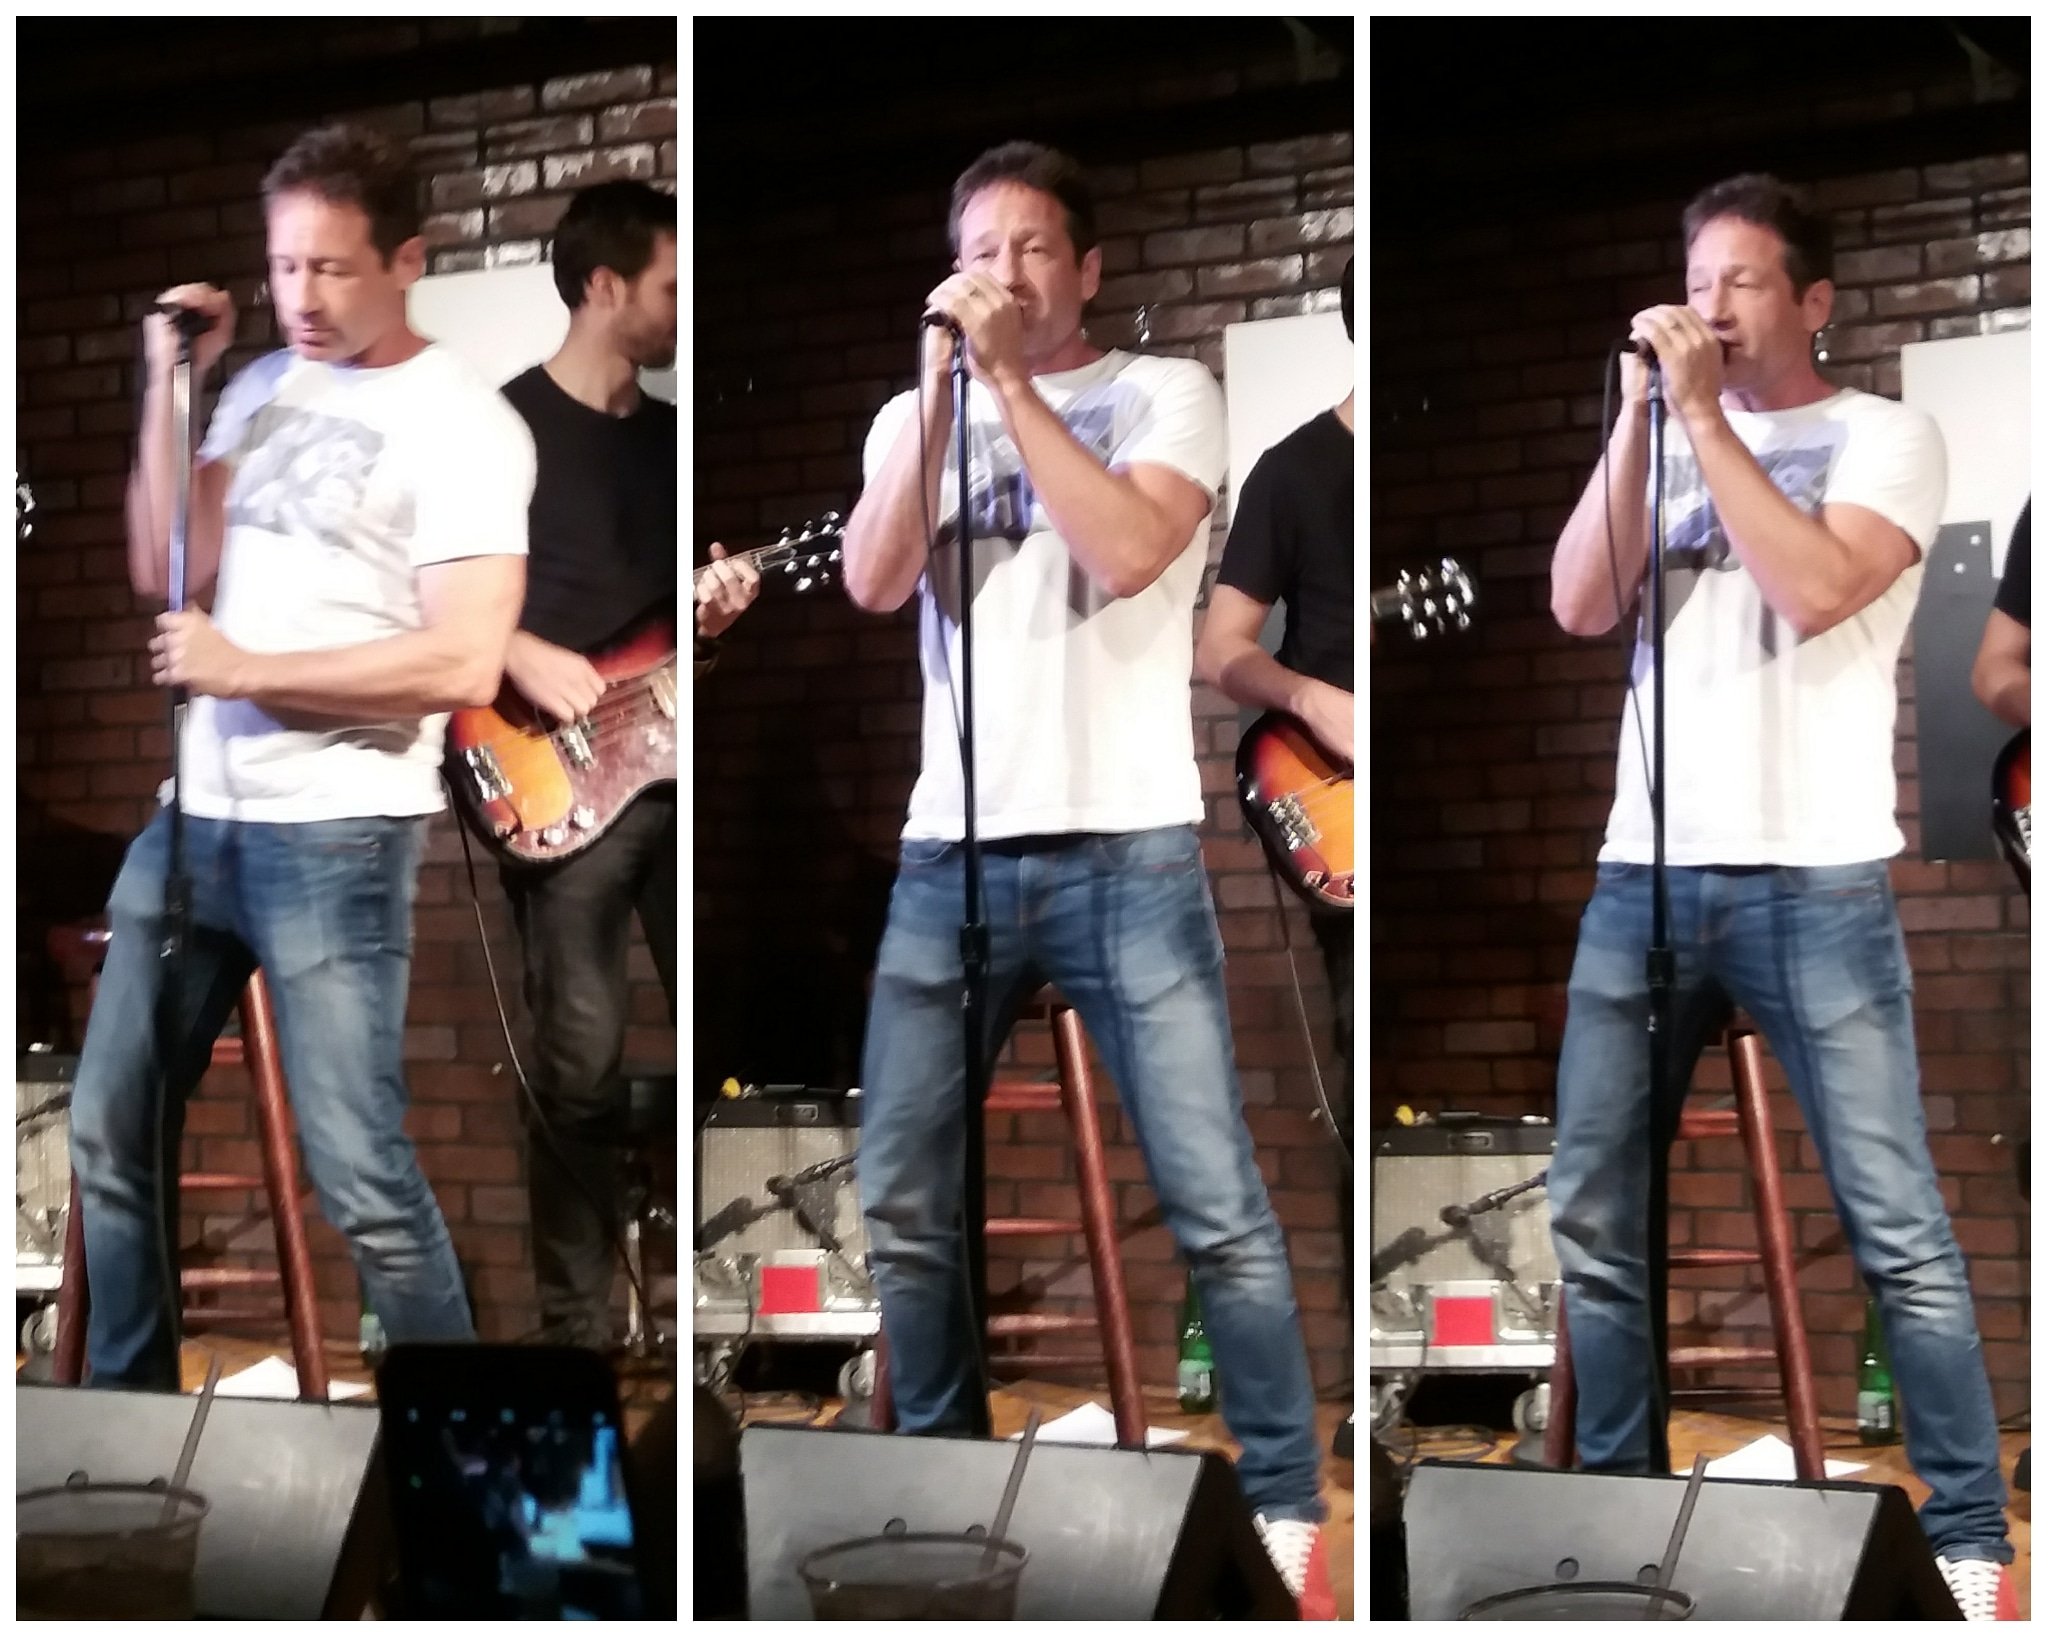 2018/04/14 - David in Private Concert in NYC DayrBCVXkAAqyj9